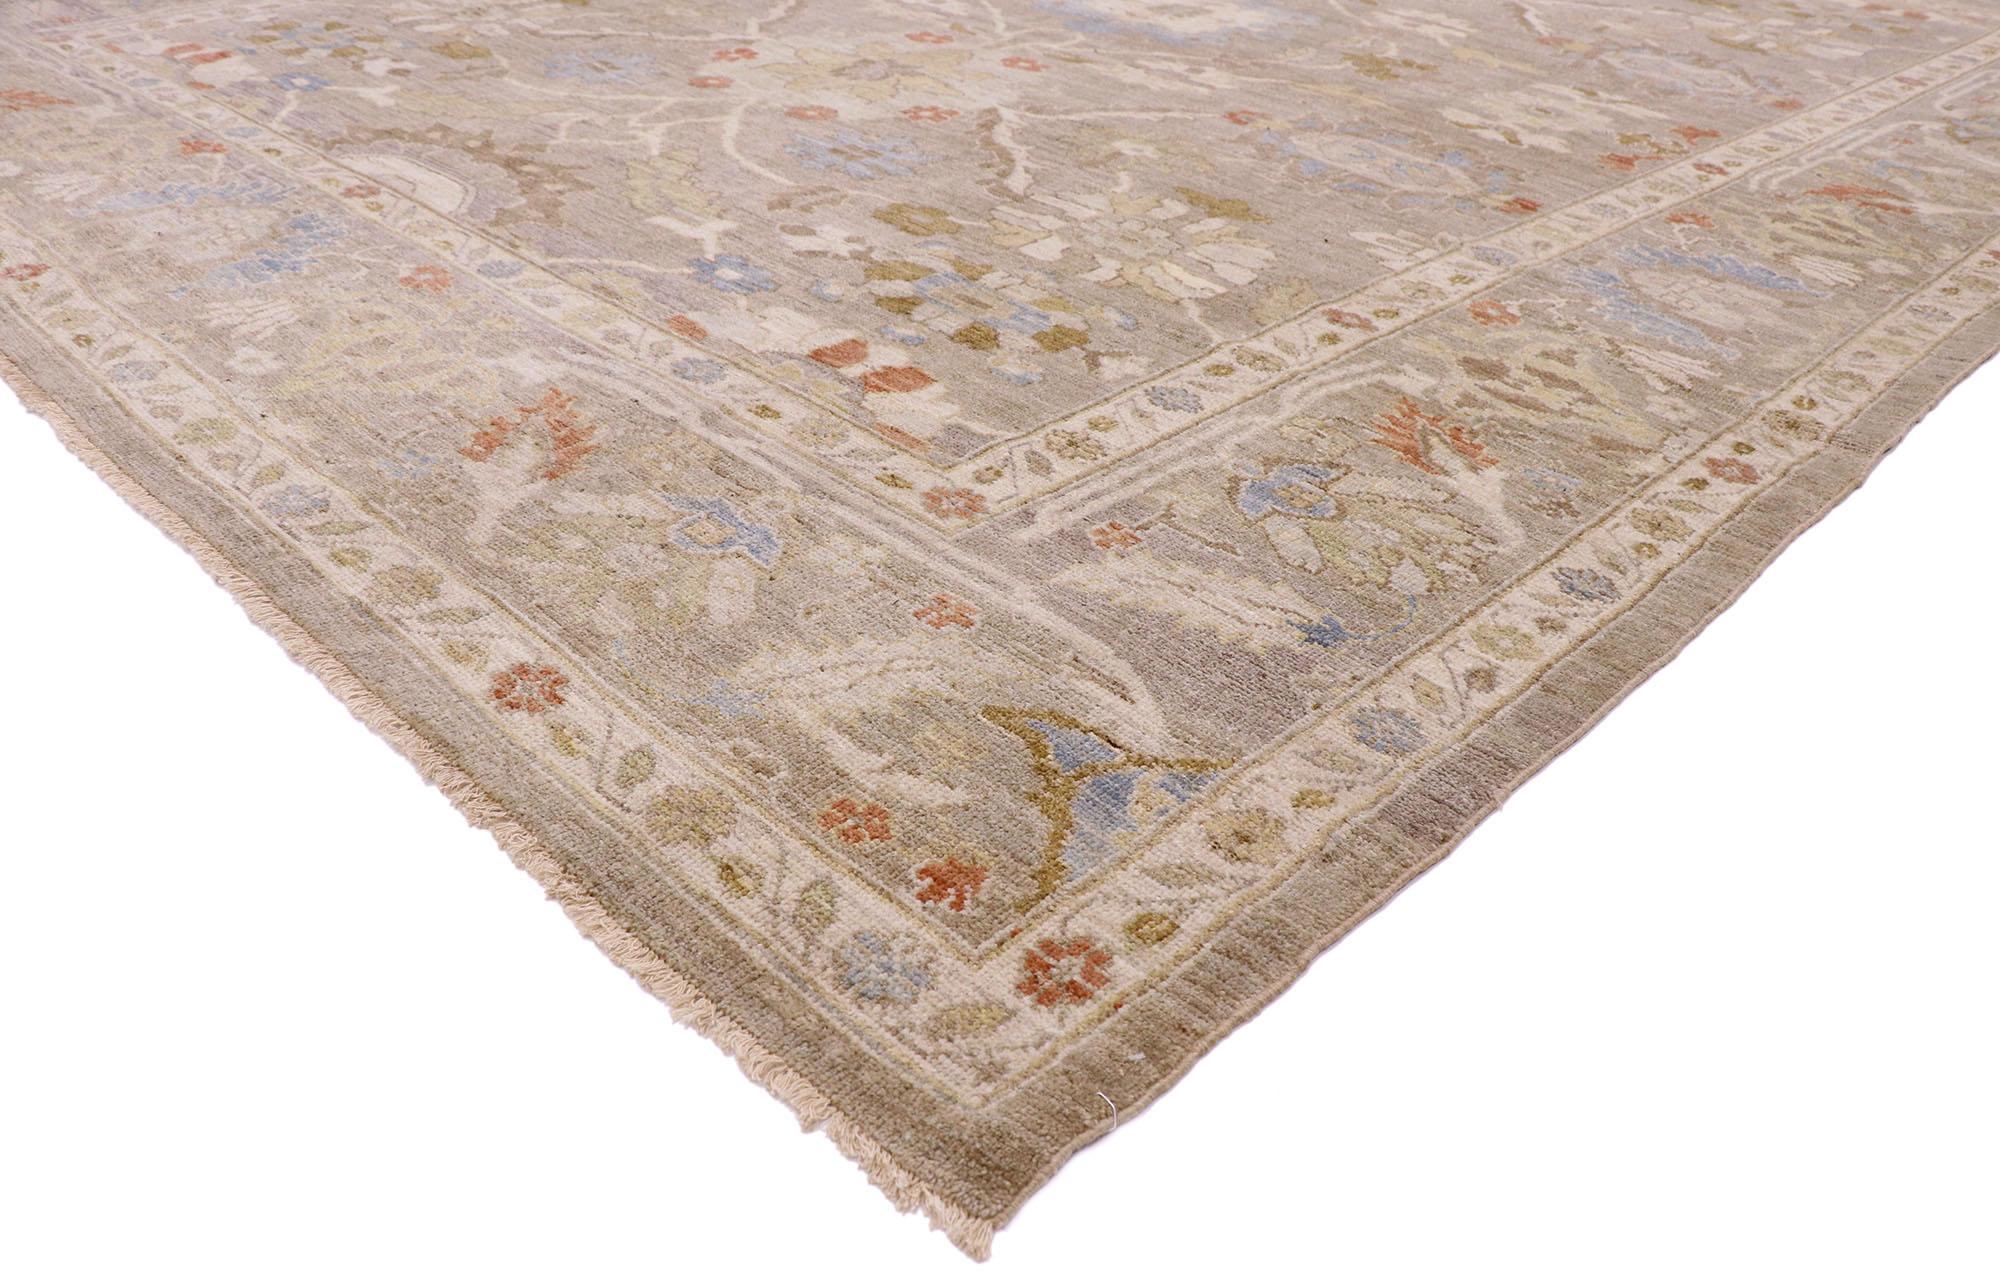 60873 Organic Modern Persian Sultanabad Rug, 10'04 x 13'06.  Infused with the principles of Organic Modern style and Biophilic Design, this hand-knotted wool contemporary Persian Sultanabad rug offers a harmonious blend of sophistication and modern